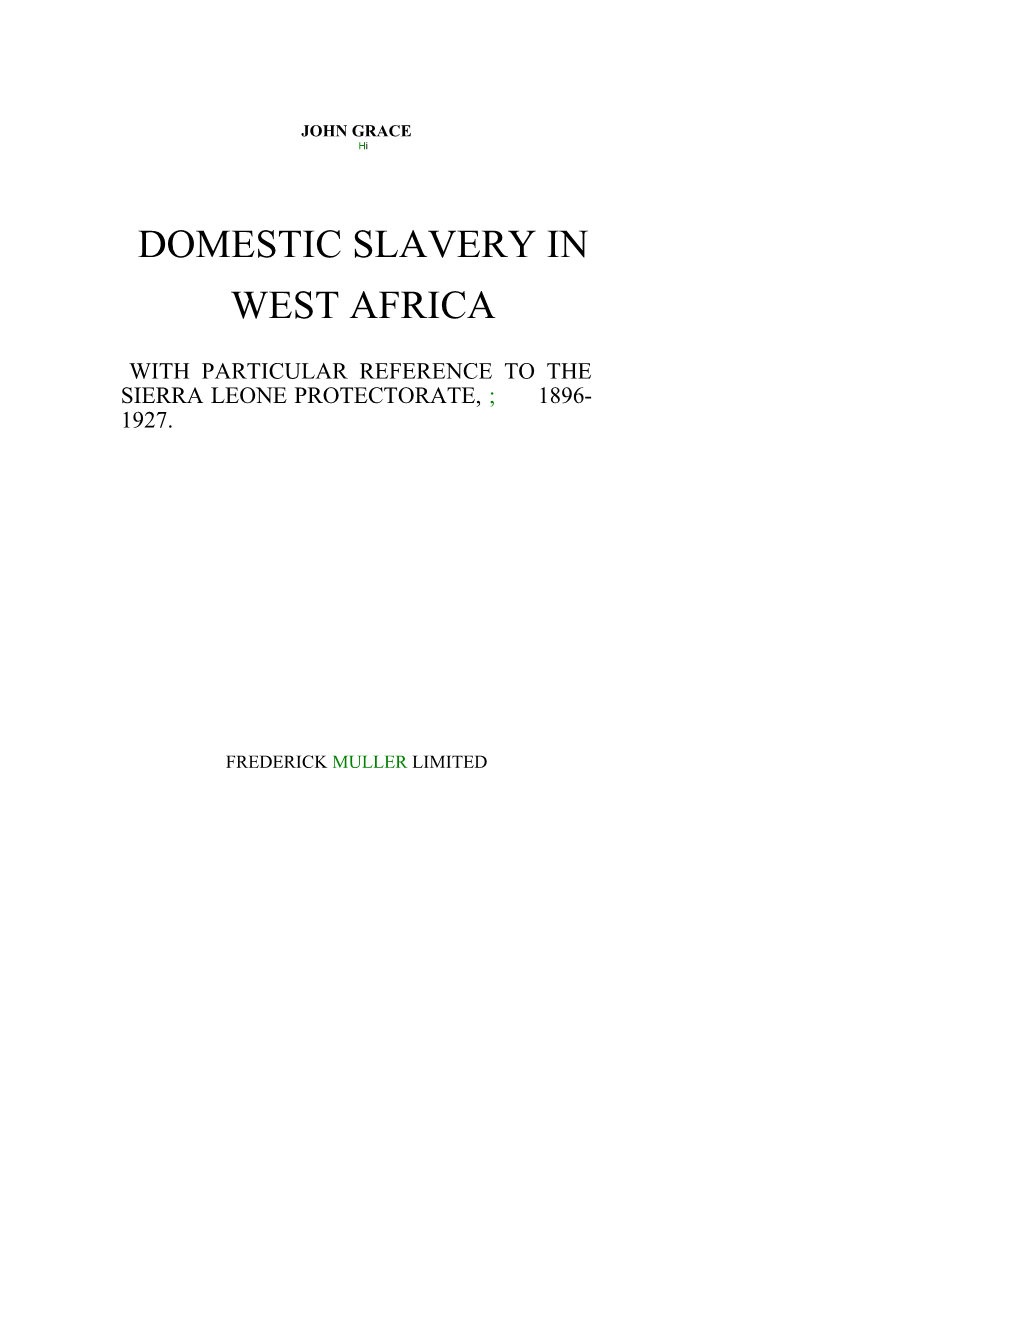 Domestic Slavery in West Africa